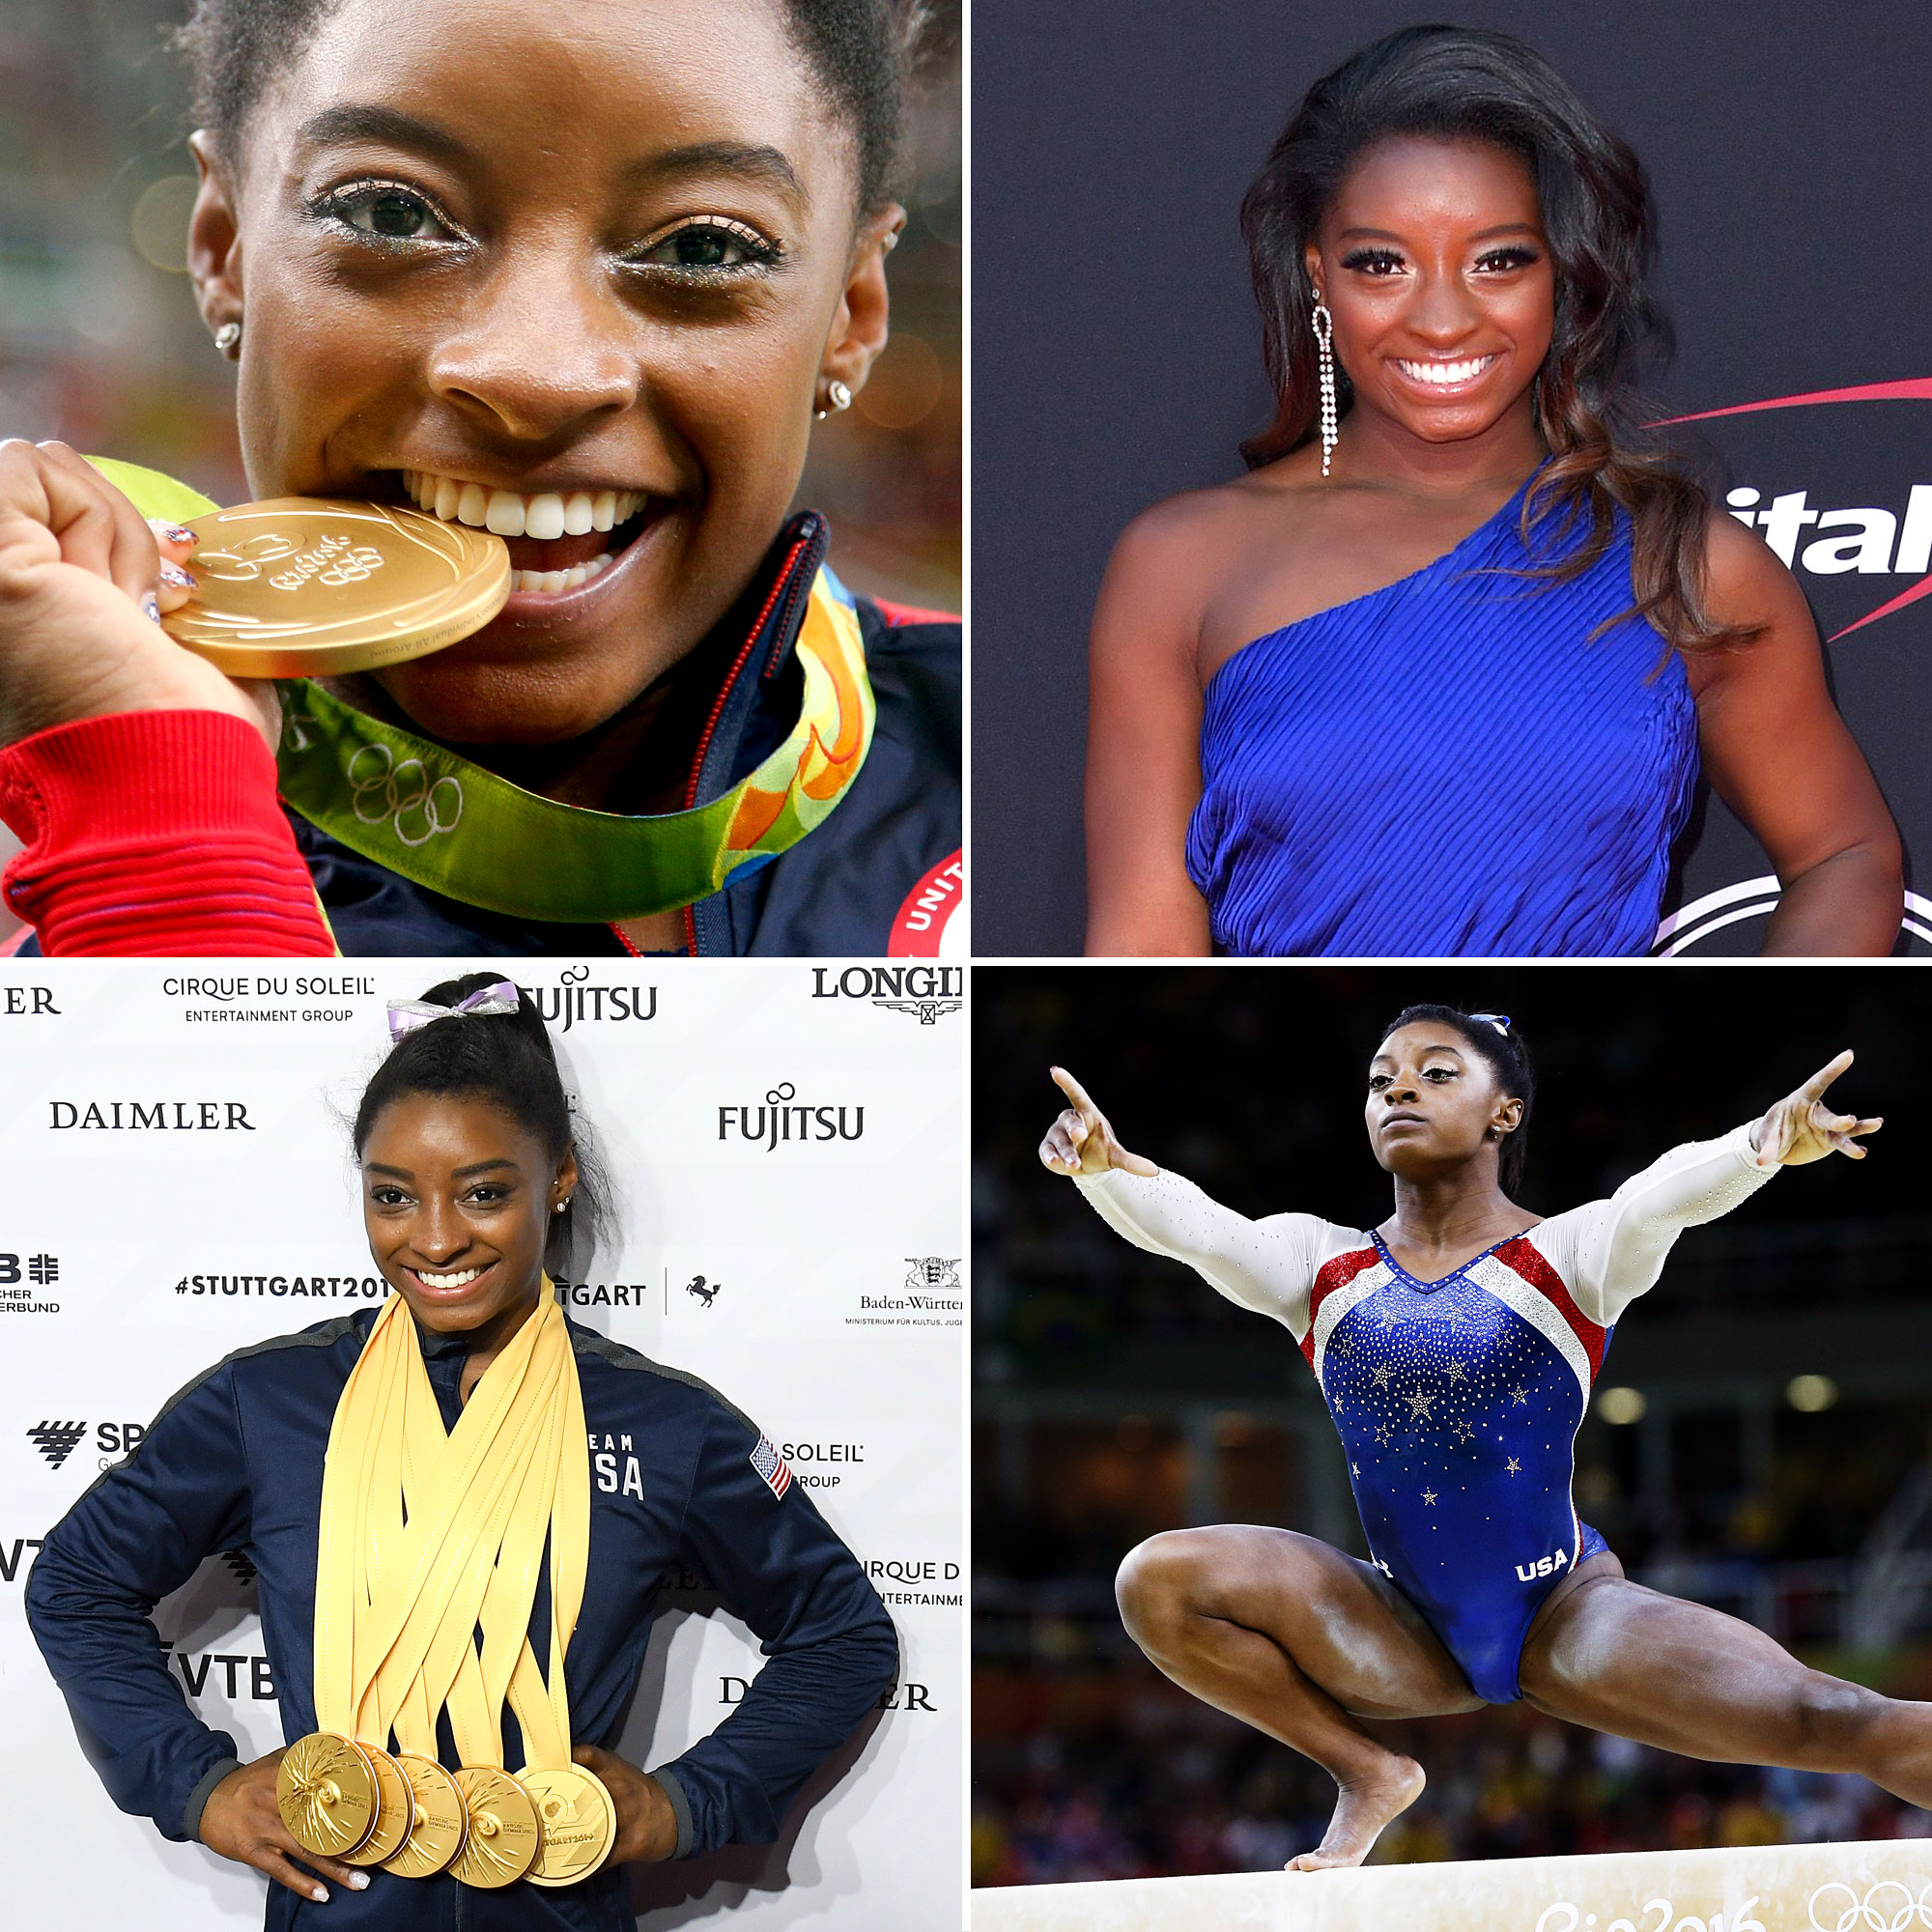 Simone Biles dazzles in her return from a 2-year layoff to dominate the US  Classic